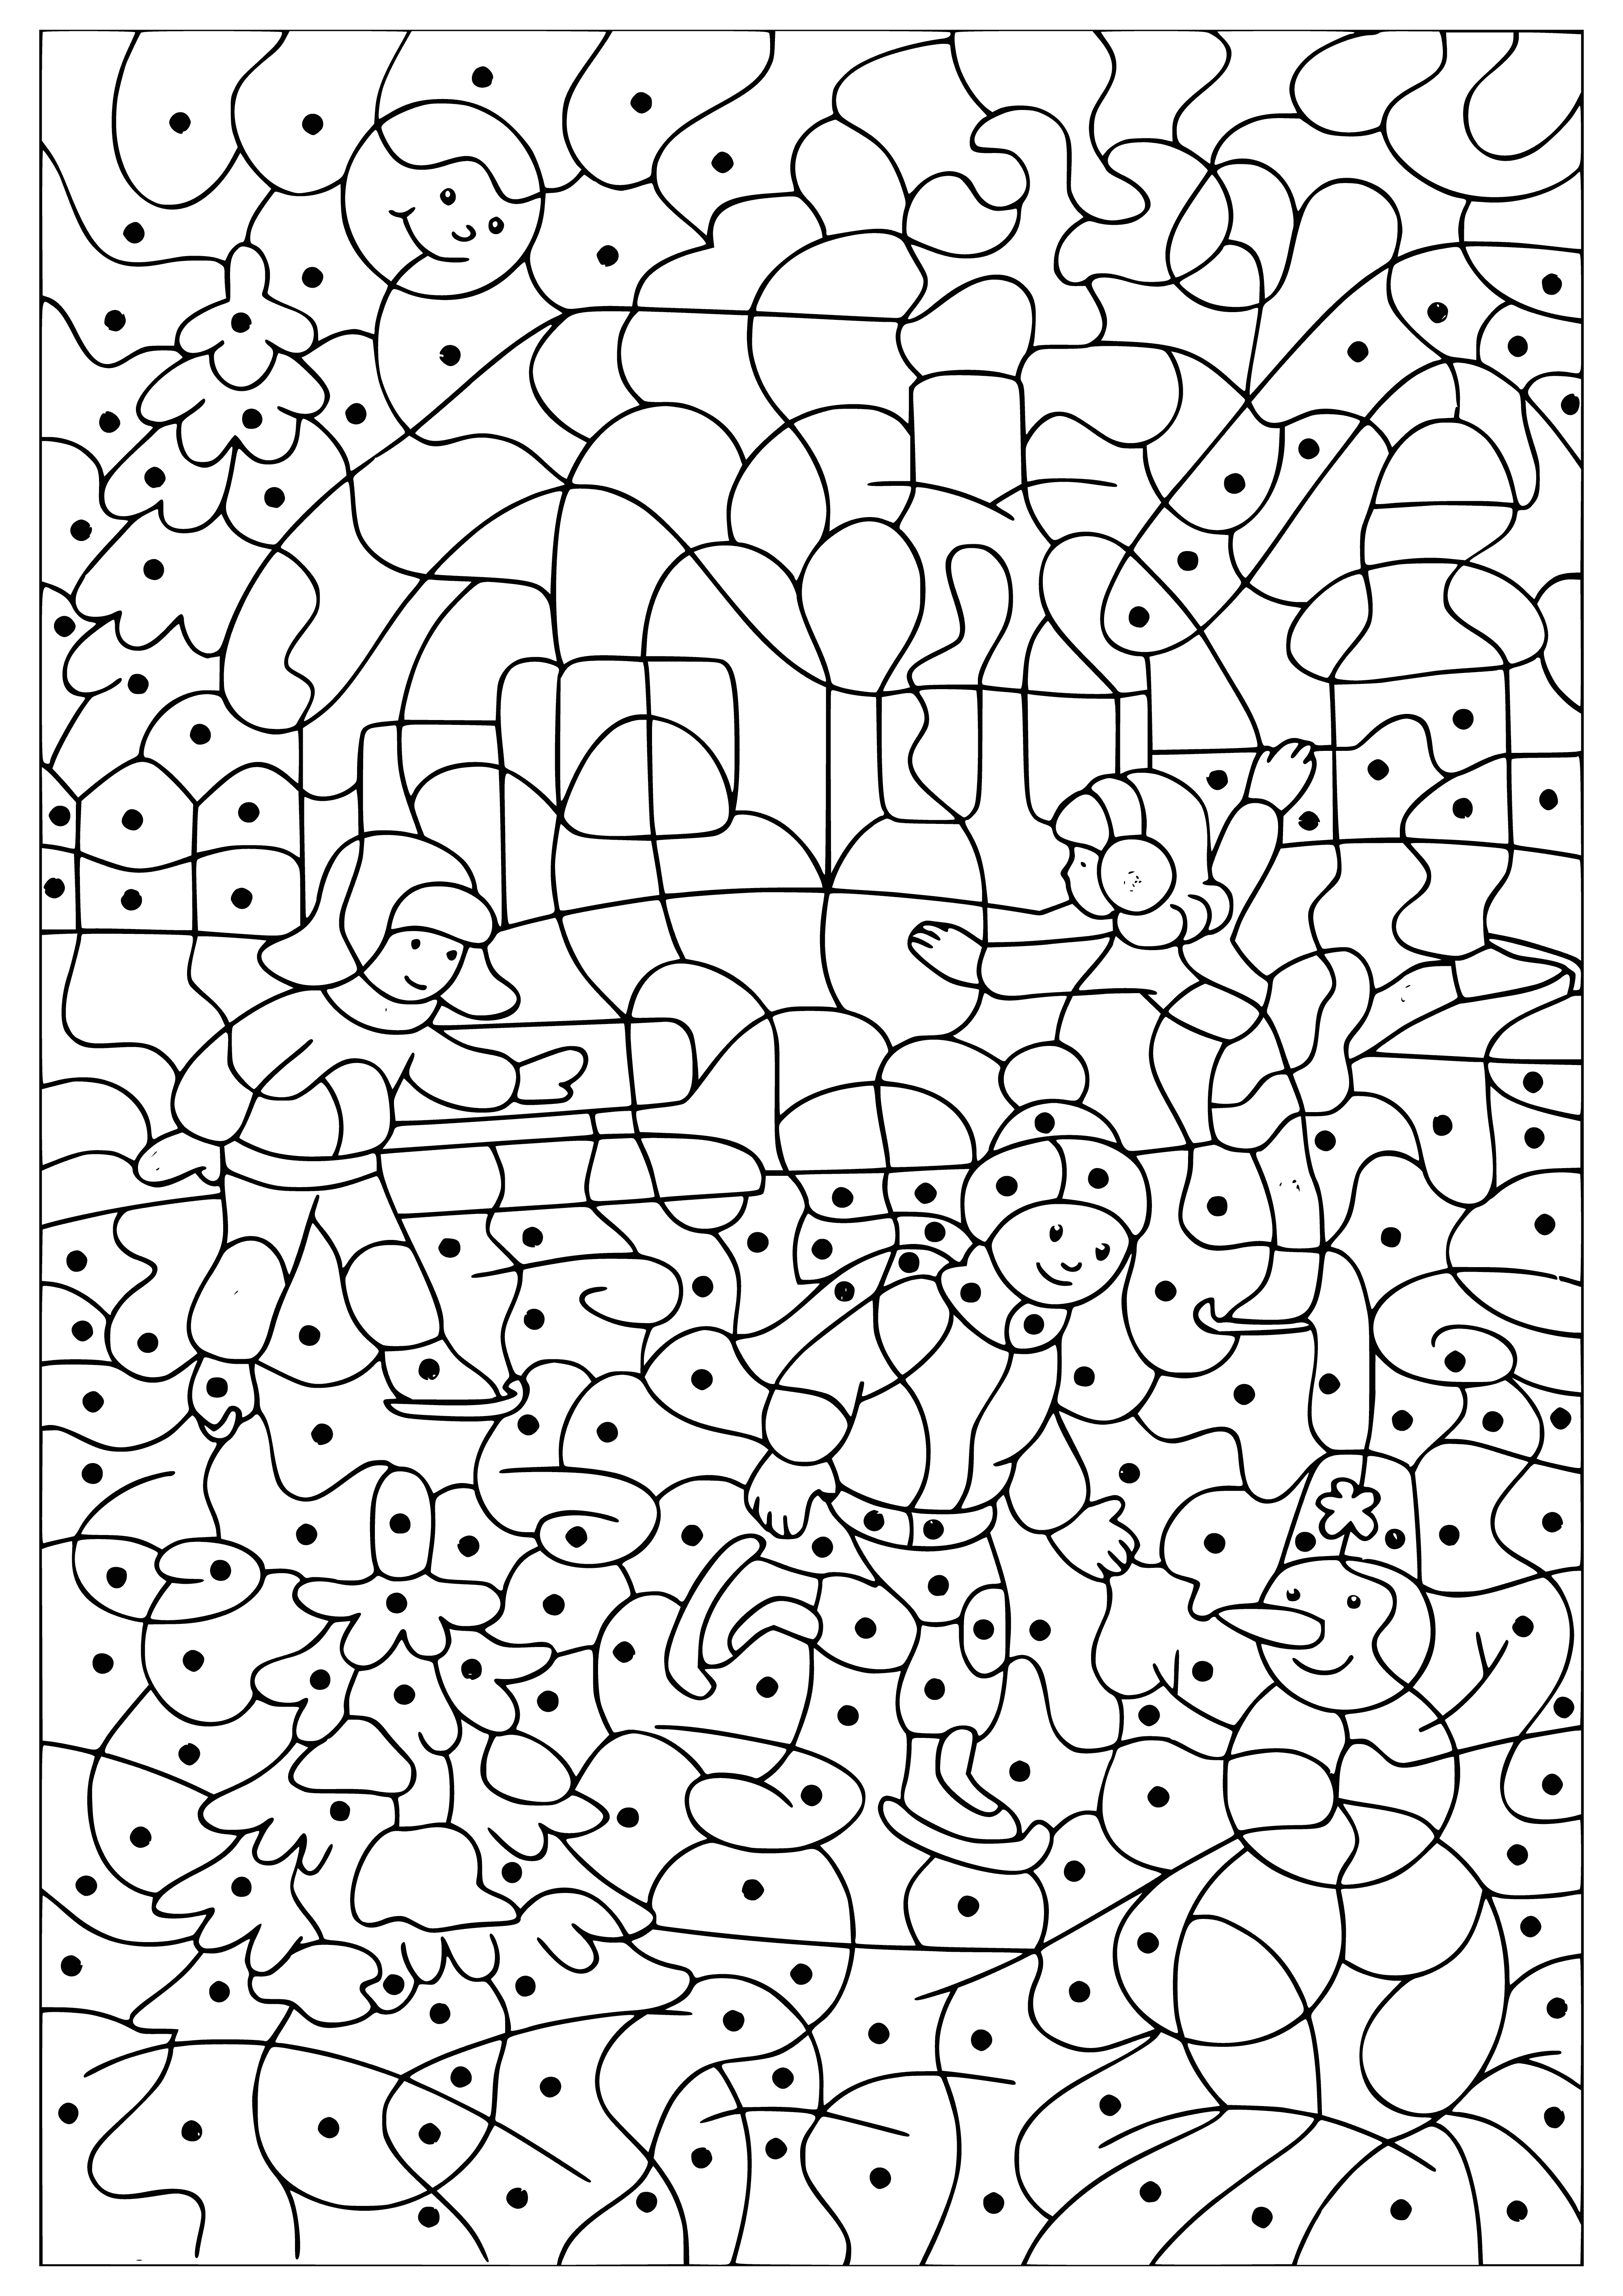 On the rink coloring page